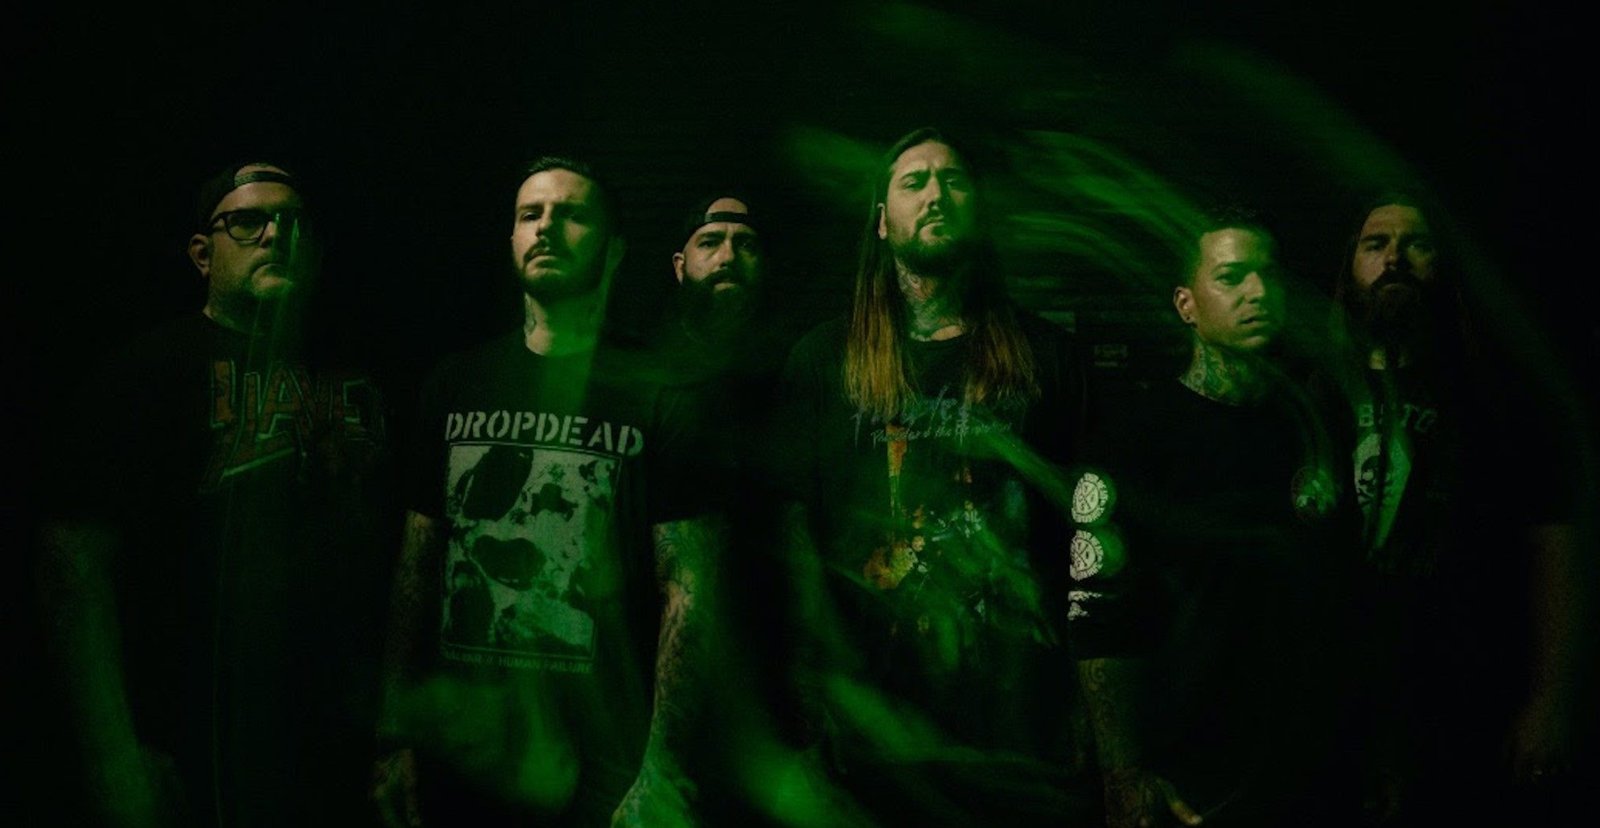 Fit For An Autopsy – “Oh What The Future Holds”